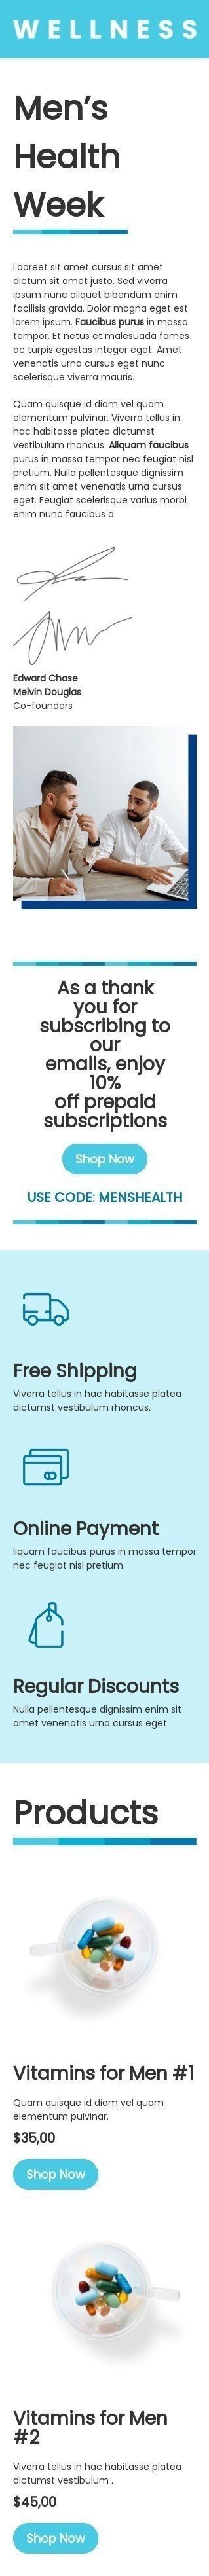 Men’s Health Week Email Template "Vitamins for Men" for Health and Wellness industry mobile view